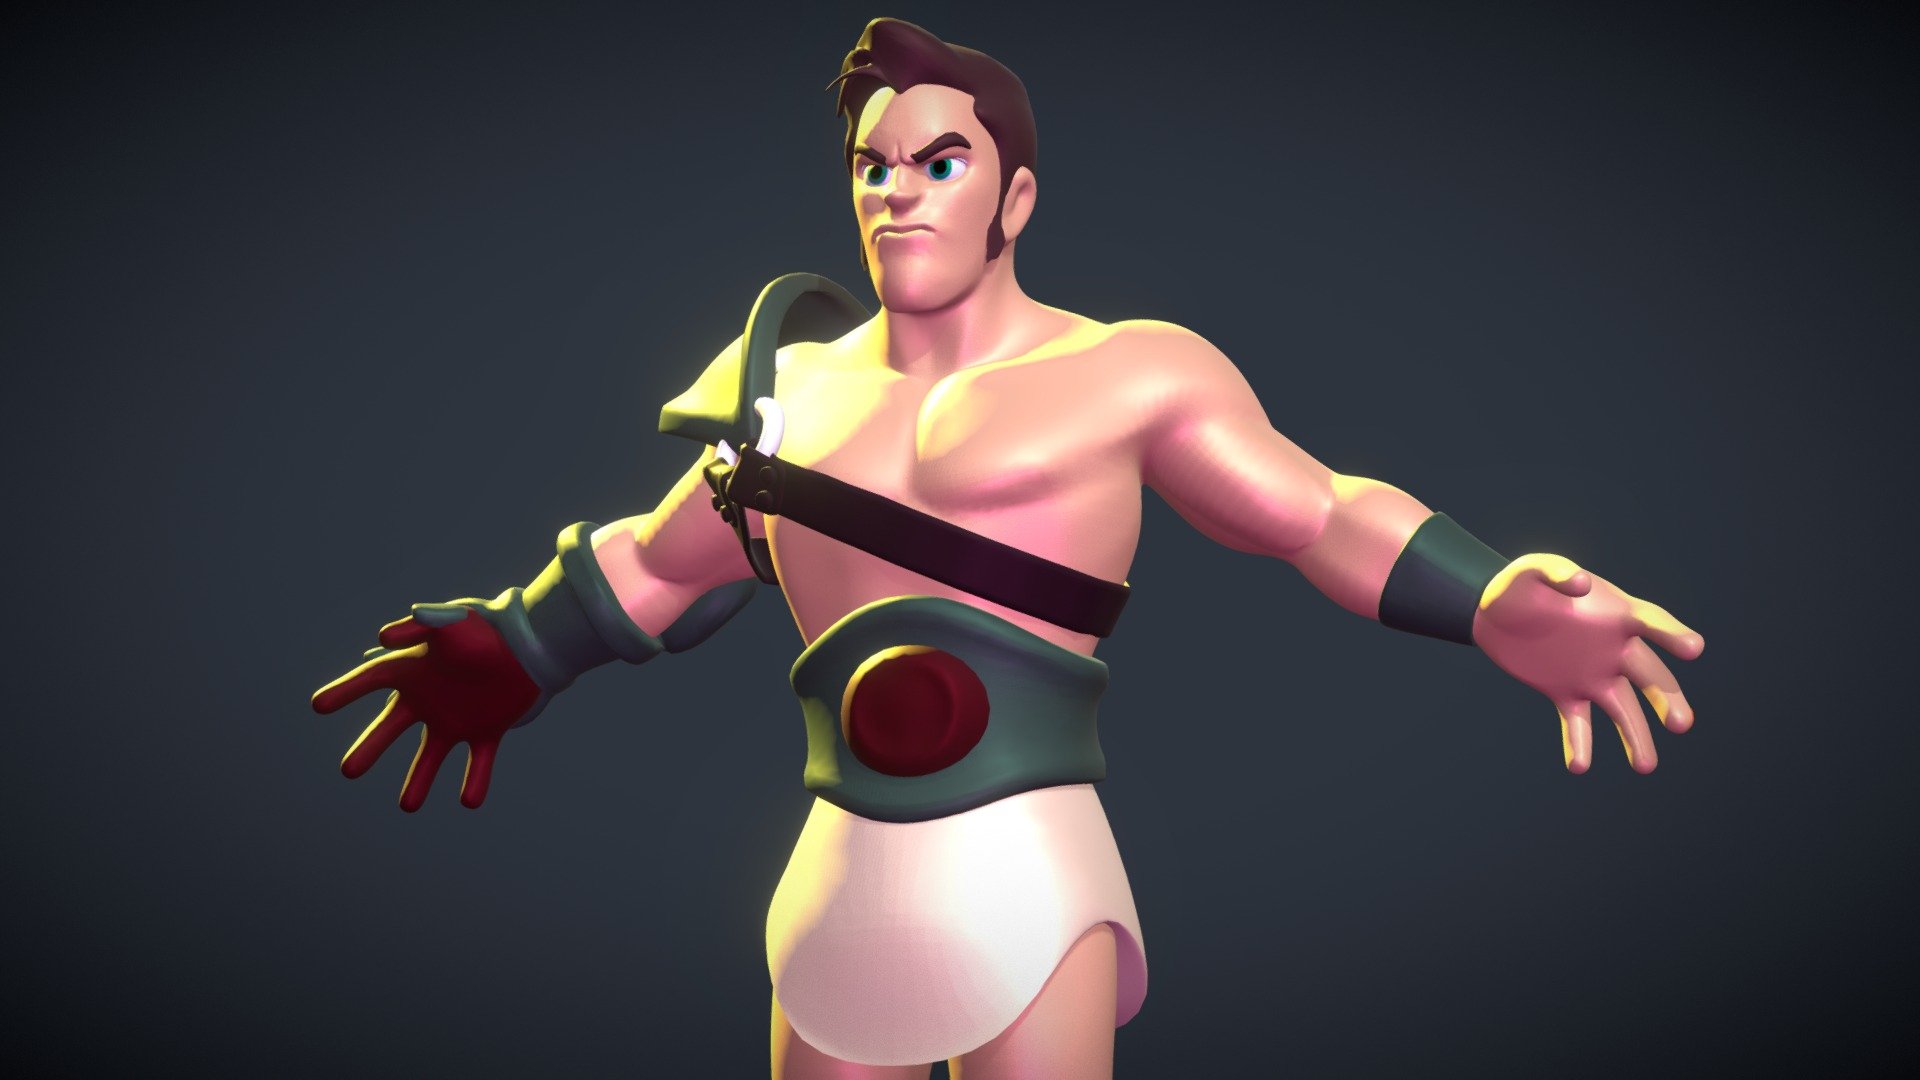 gladiator character ready for action - GLADIATOR - 3D model by ruiluis82 3d model